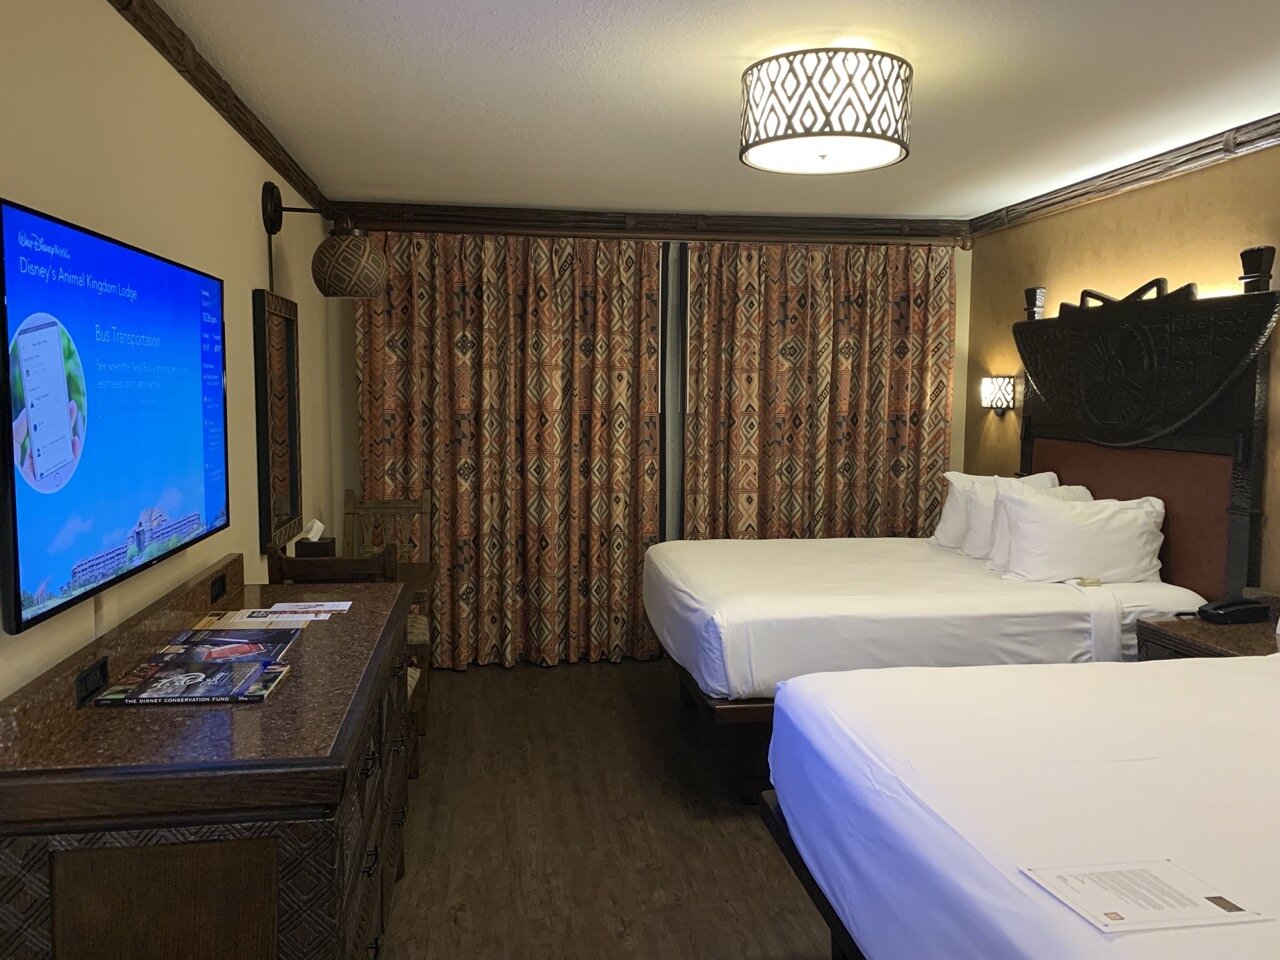 Review of Animal Kingdom Lodge - Savanna View Room - Mouse Hacking